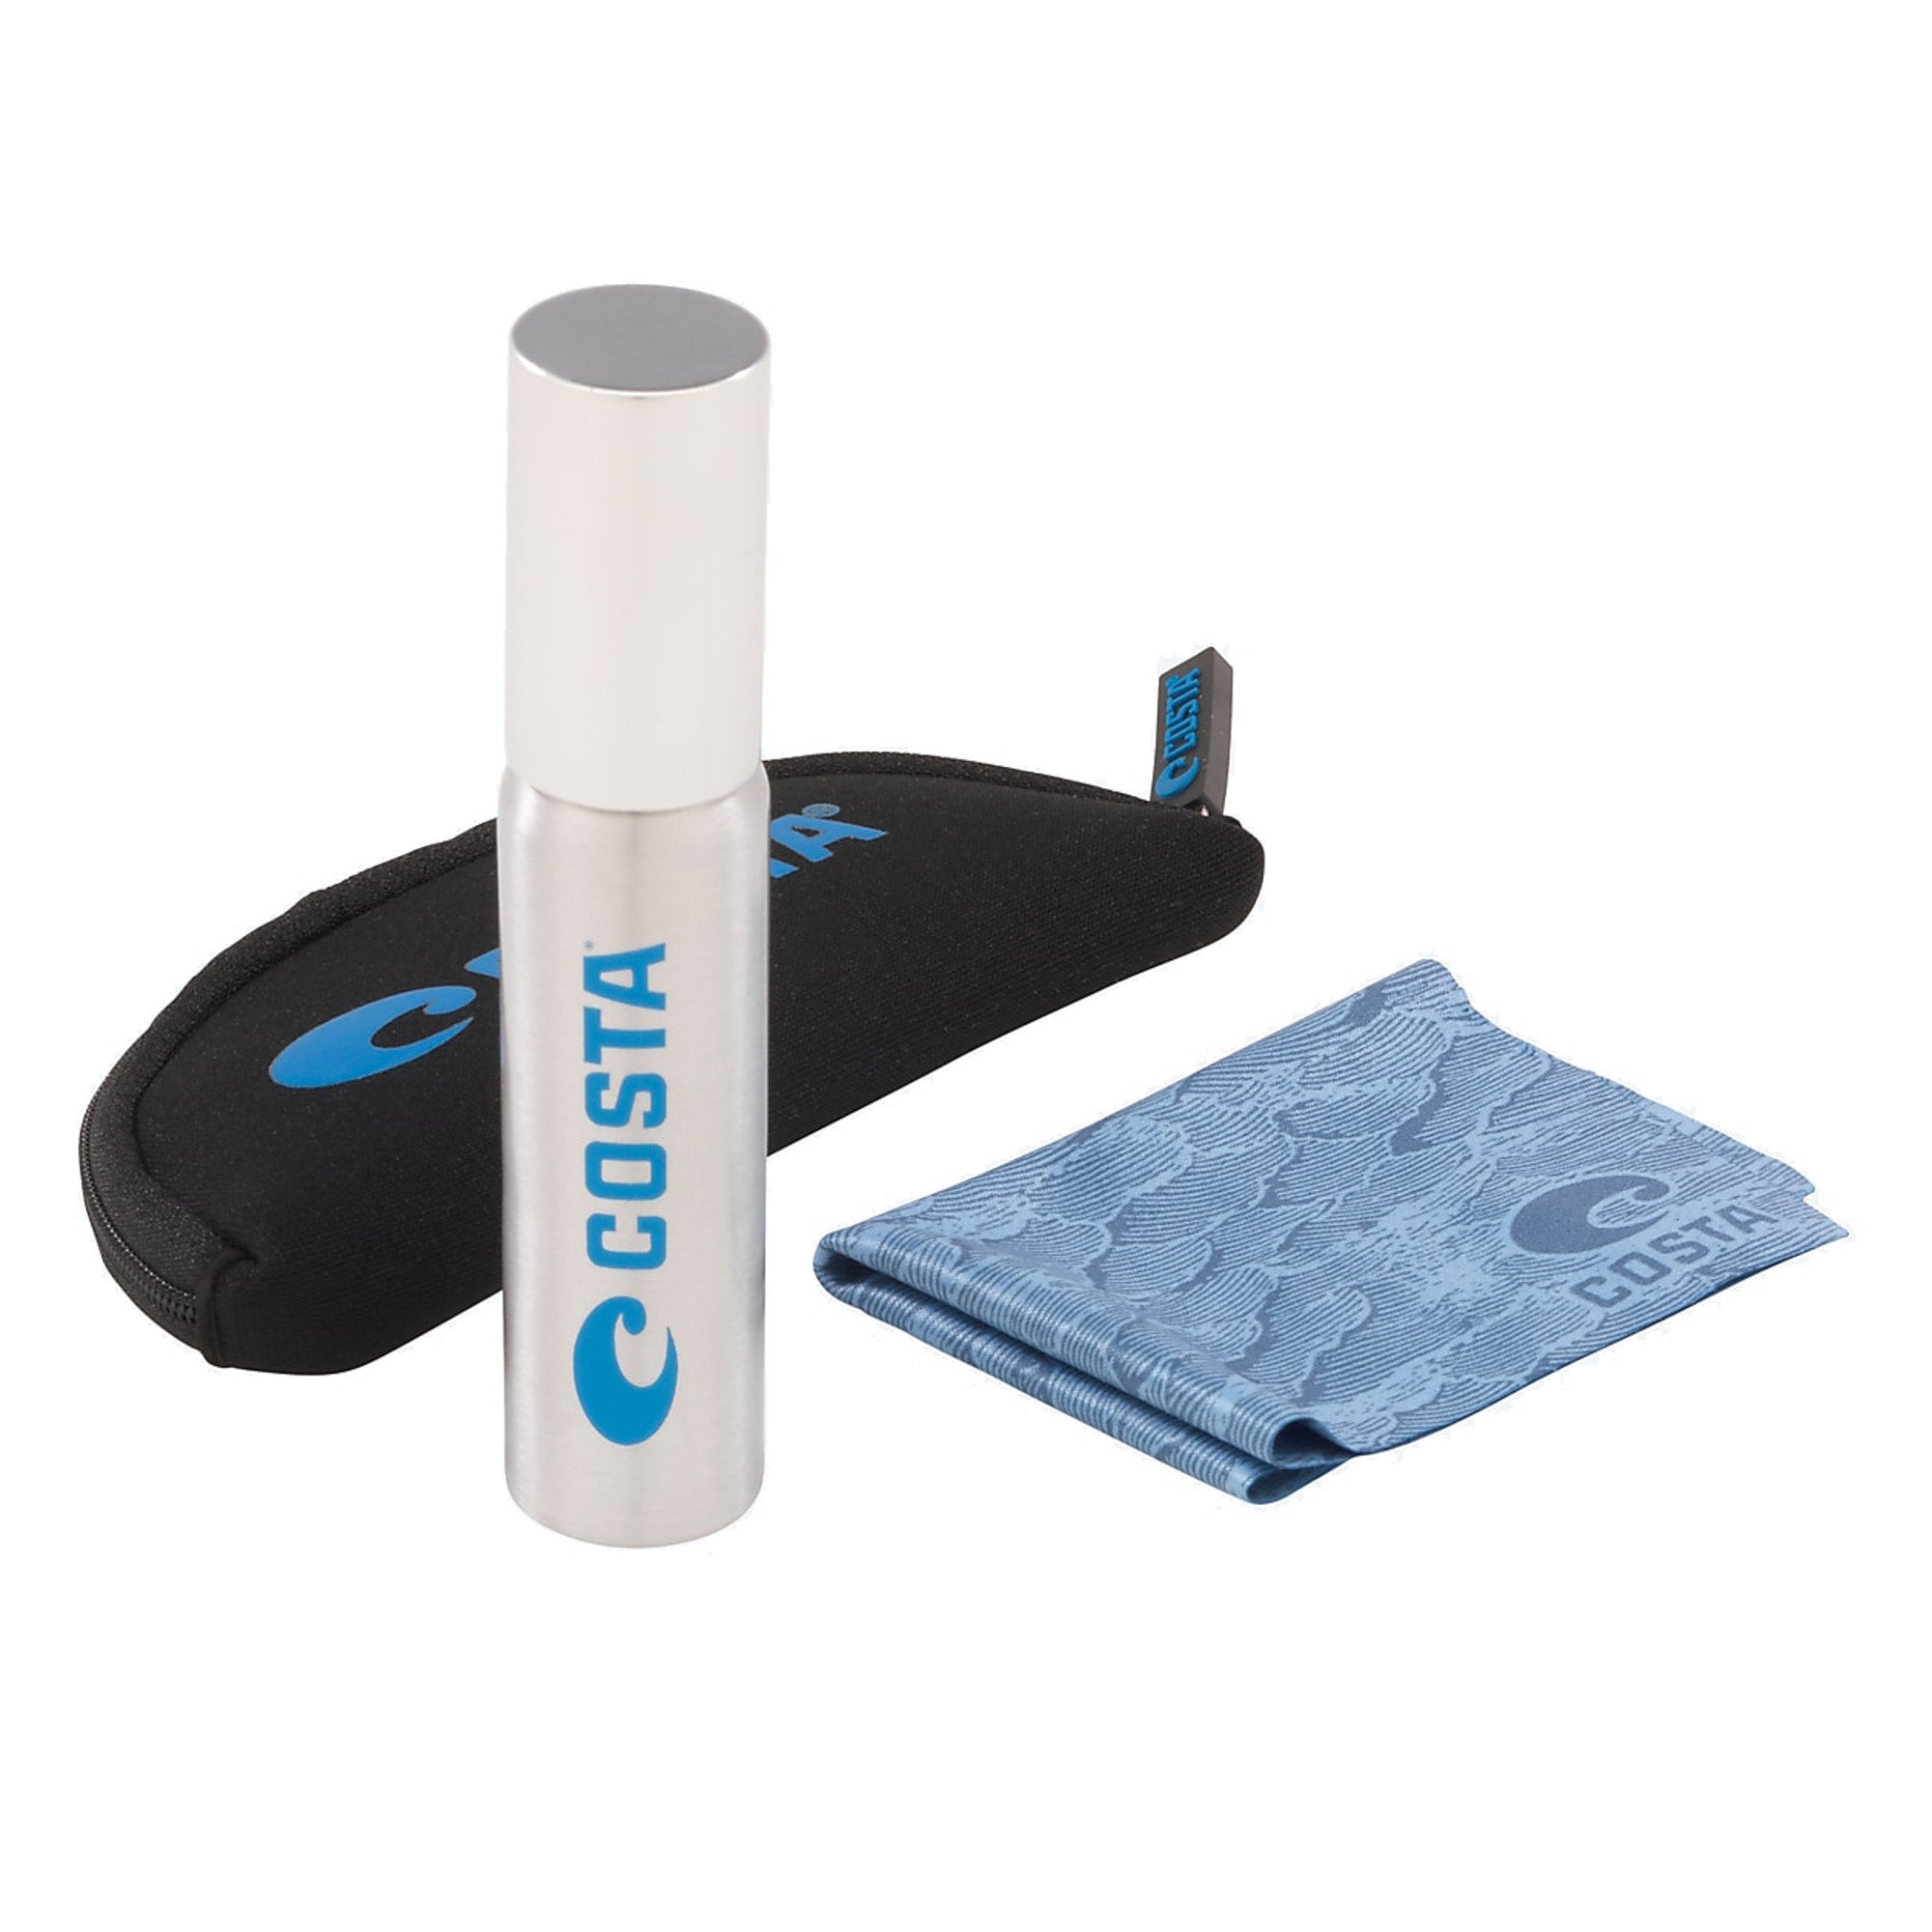 COSTA DEL MAR CLEANING KIT